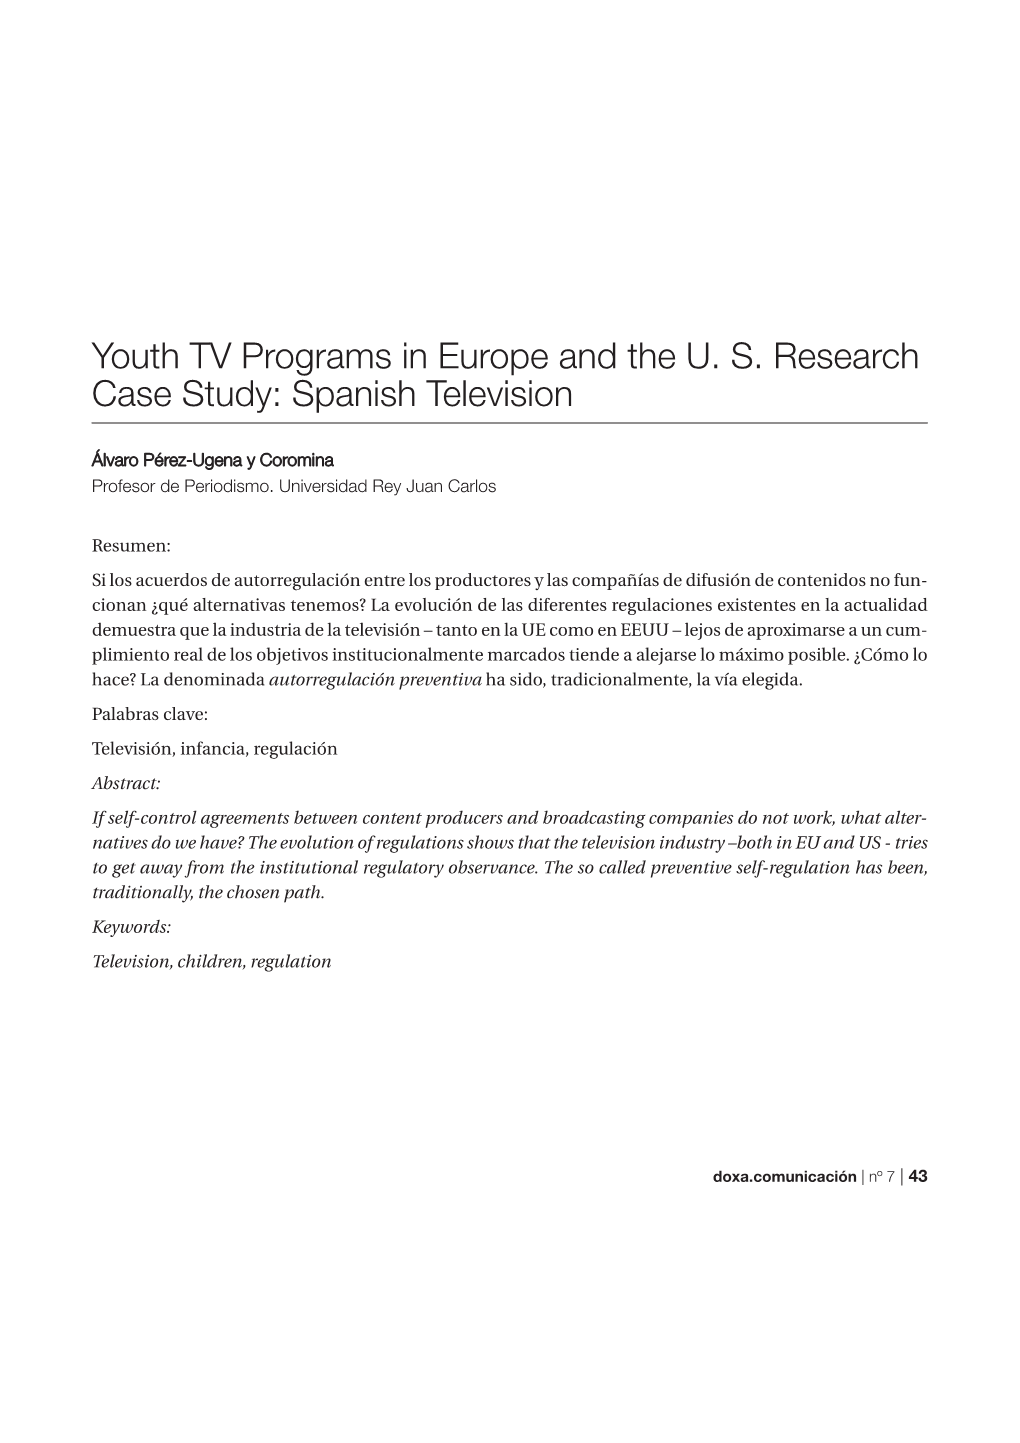 Youth TV Programs in Europe and the U. S. Research Case Study: Spanish Television